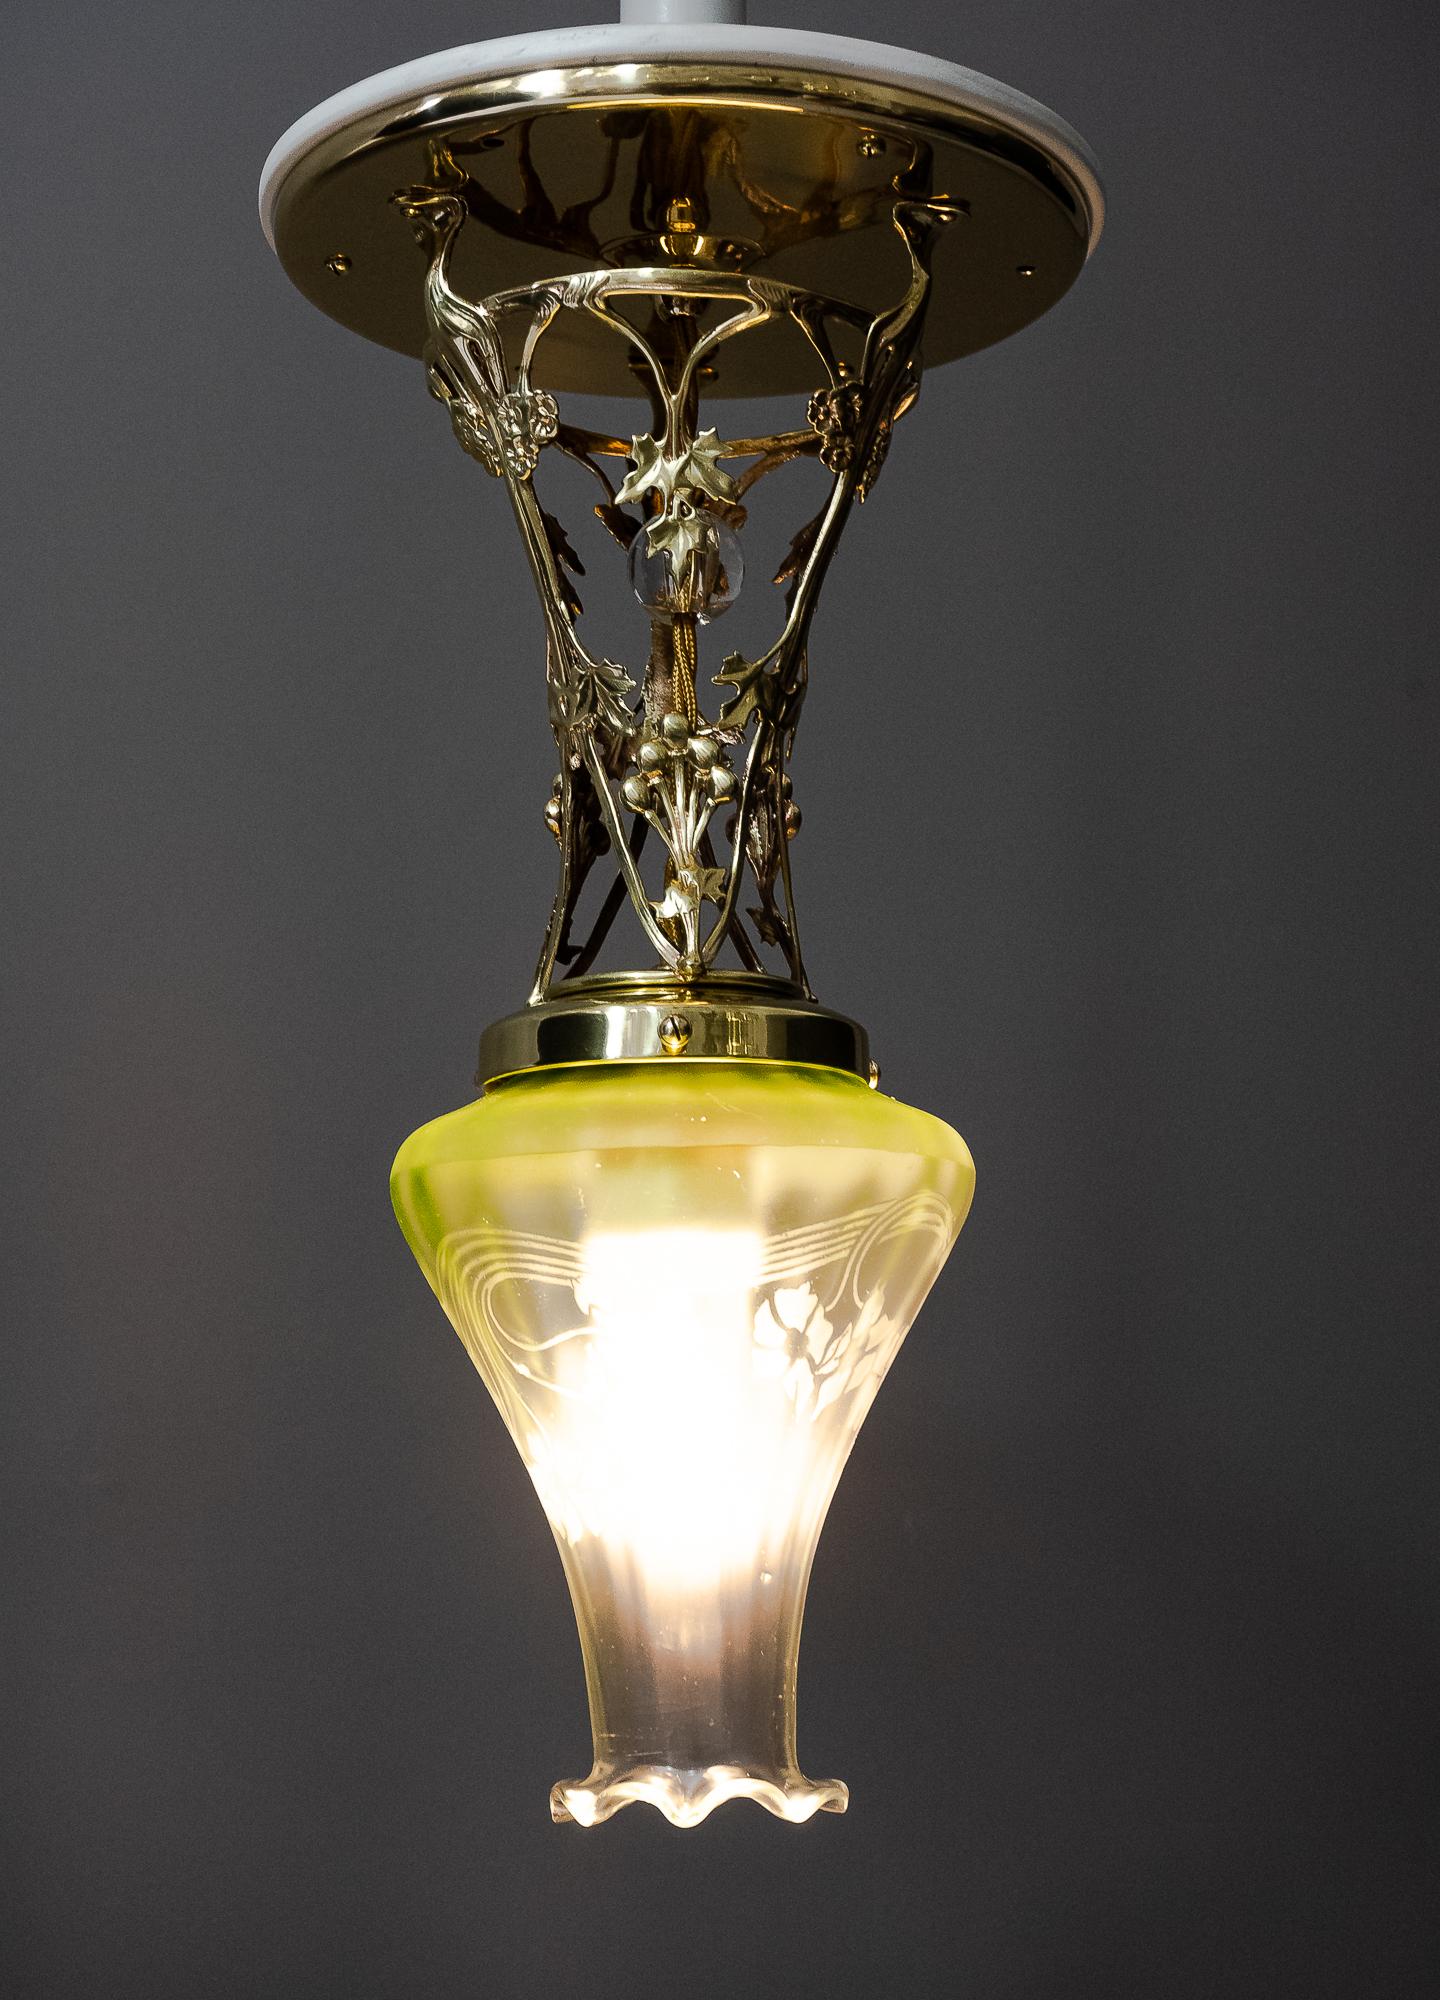 Jugendstil Ceiling Lamp Vienna circa 1908 with Original Glass Shade For Sale 6